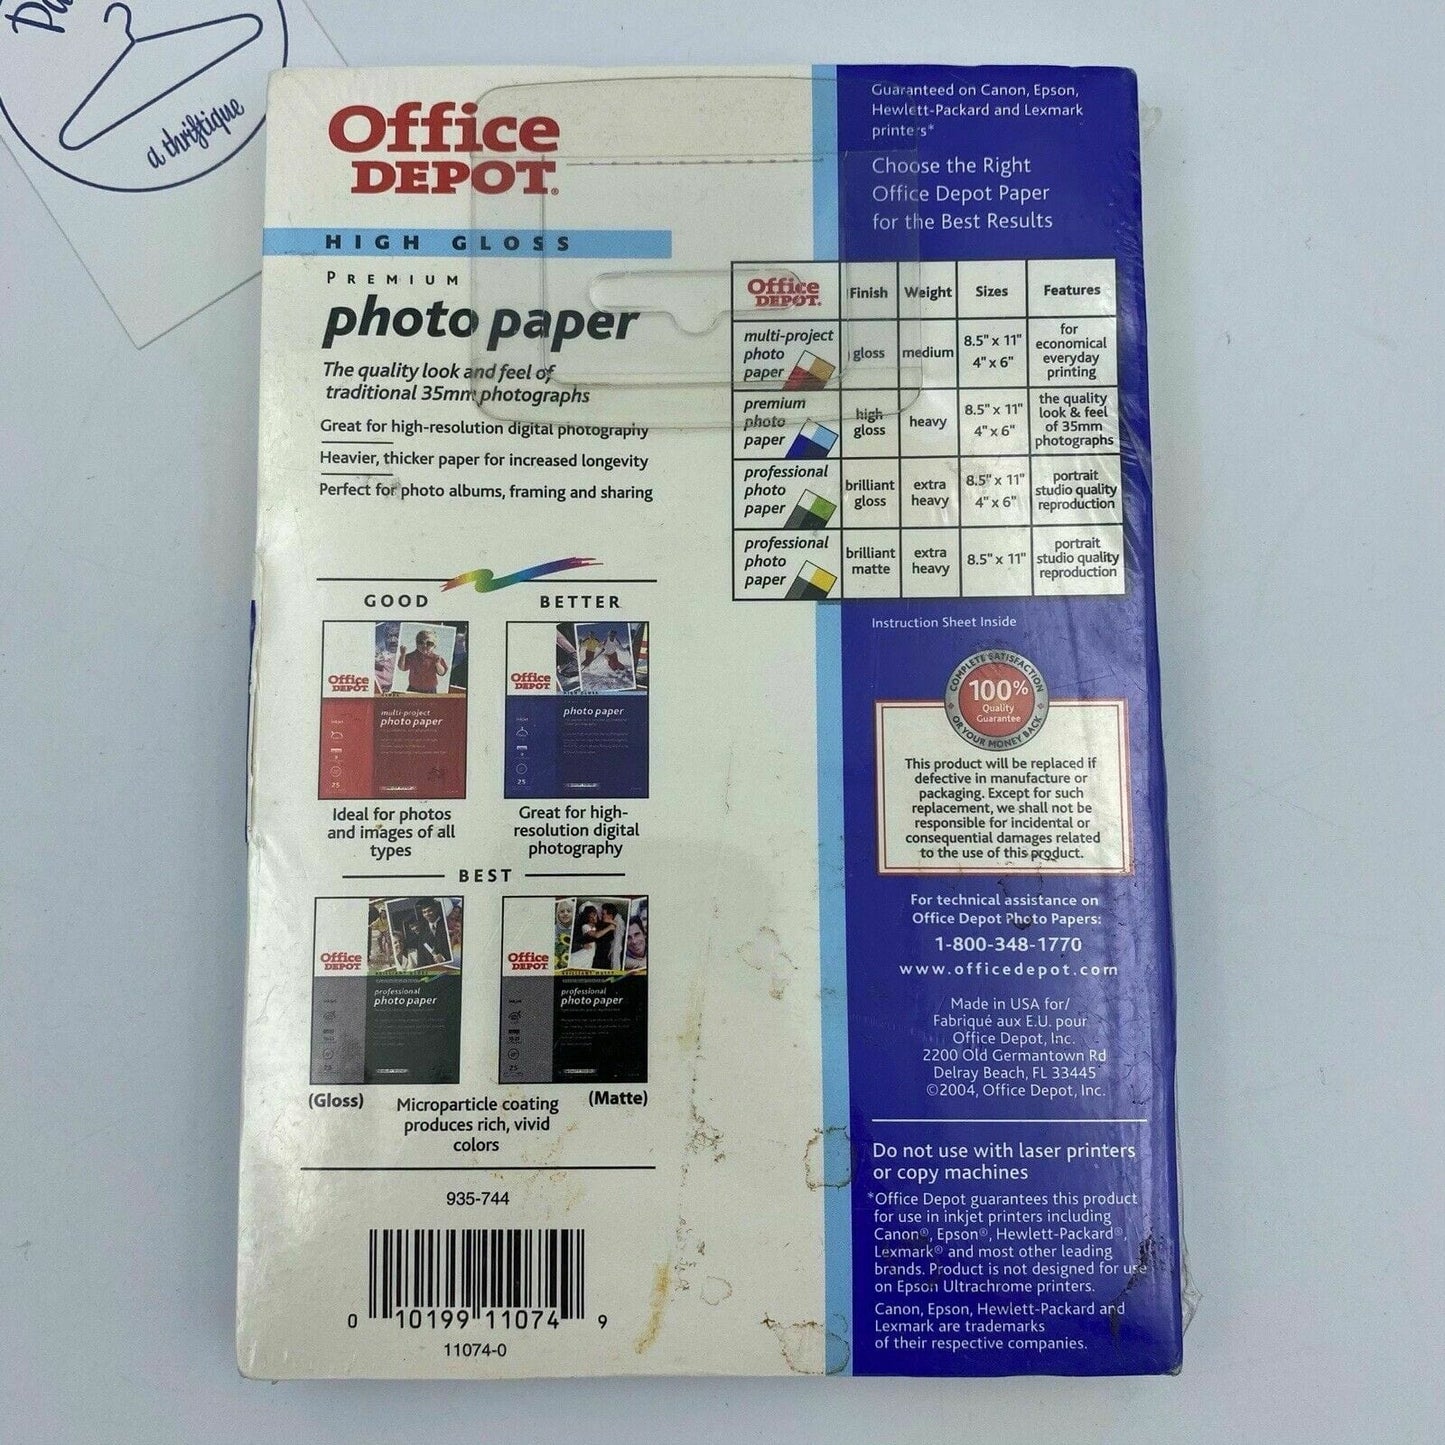 NEW Office Depot Photo Paper High Gloss for InkJet Printers 4"X6" 50 Sheets